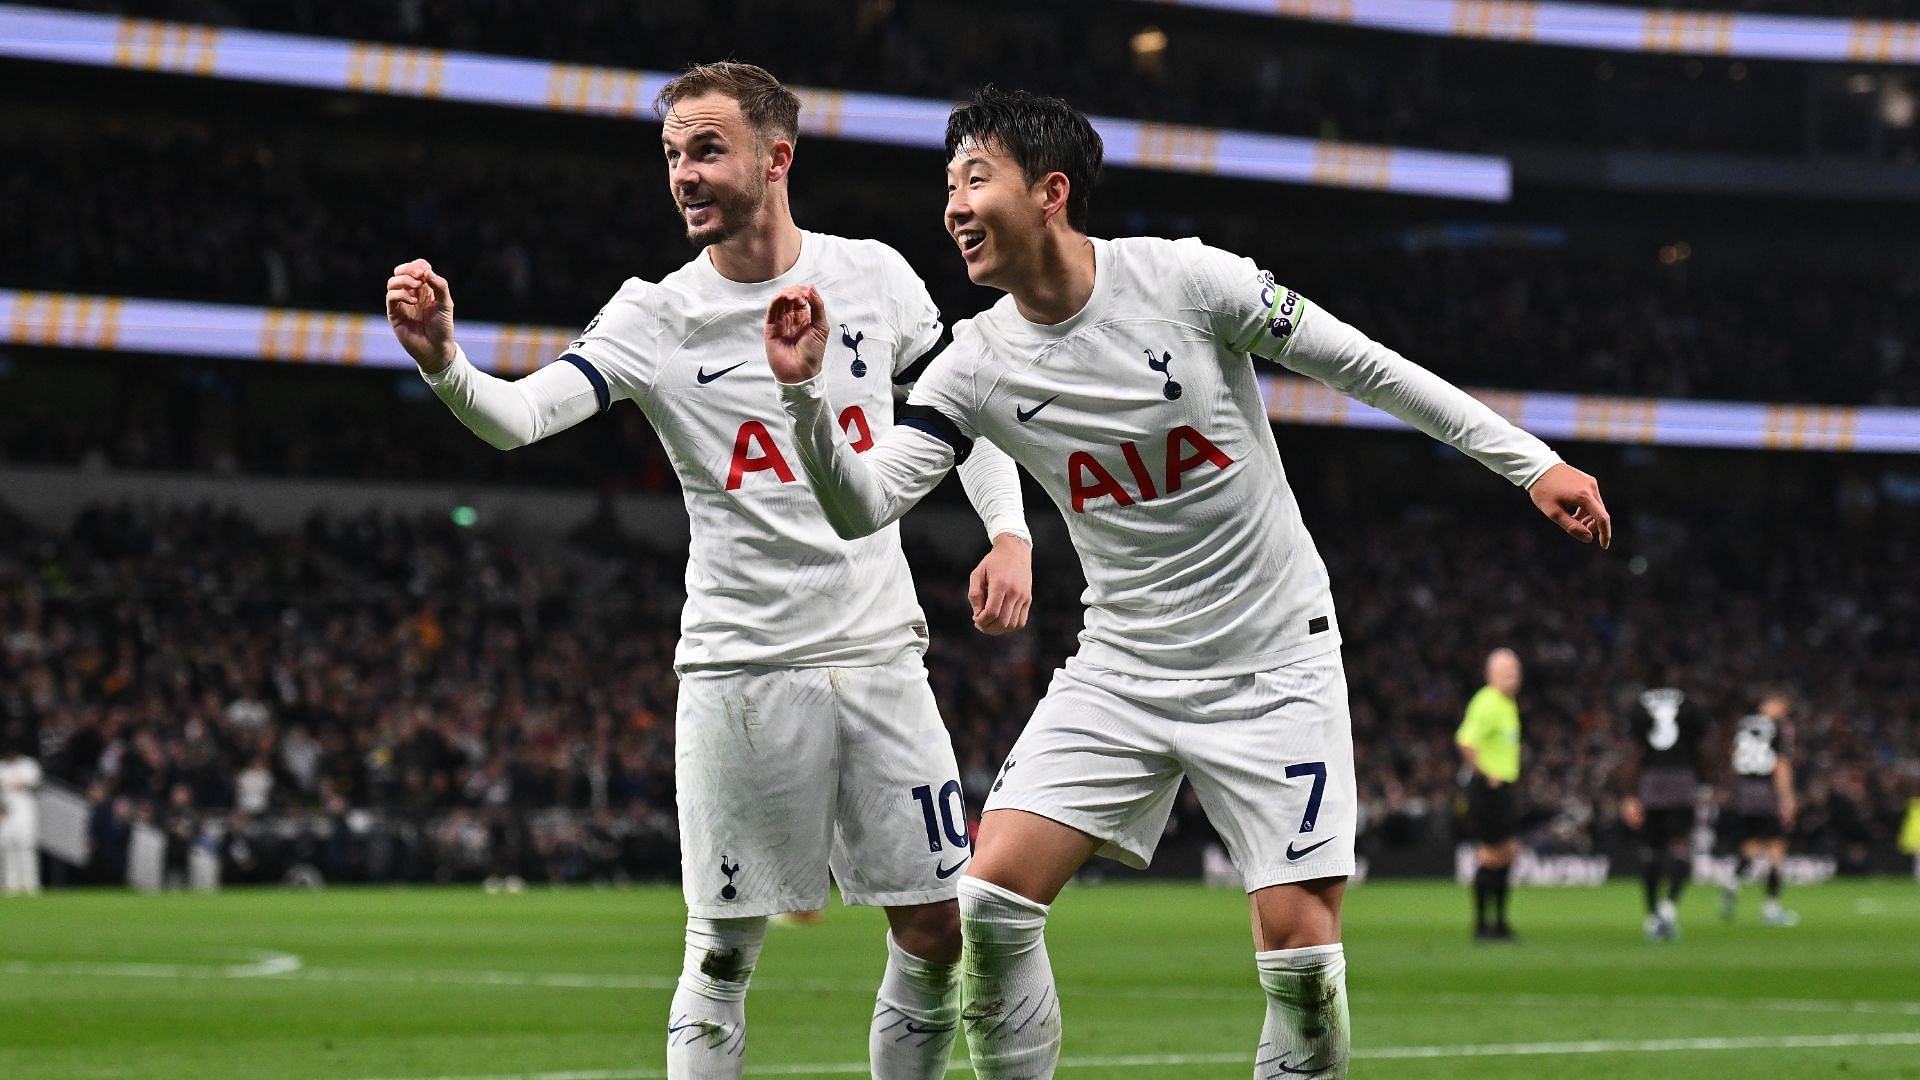 James Maddison and Heung-Min Son have driven Tottenham to the top of the Premier League